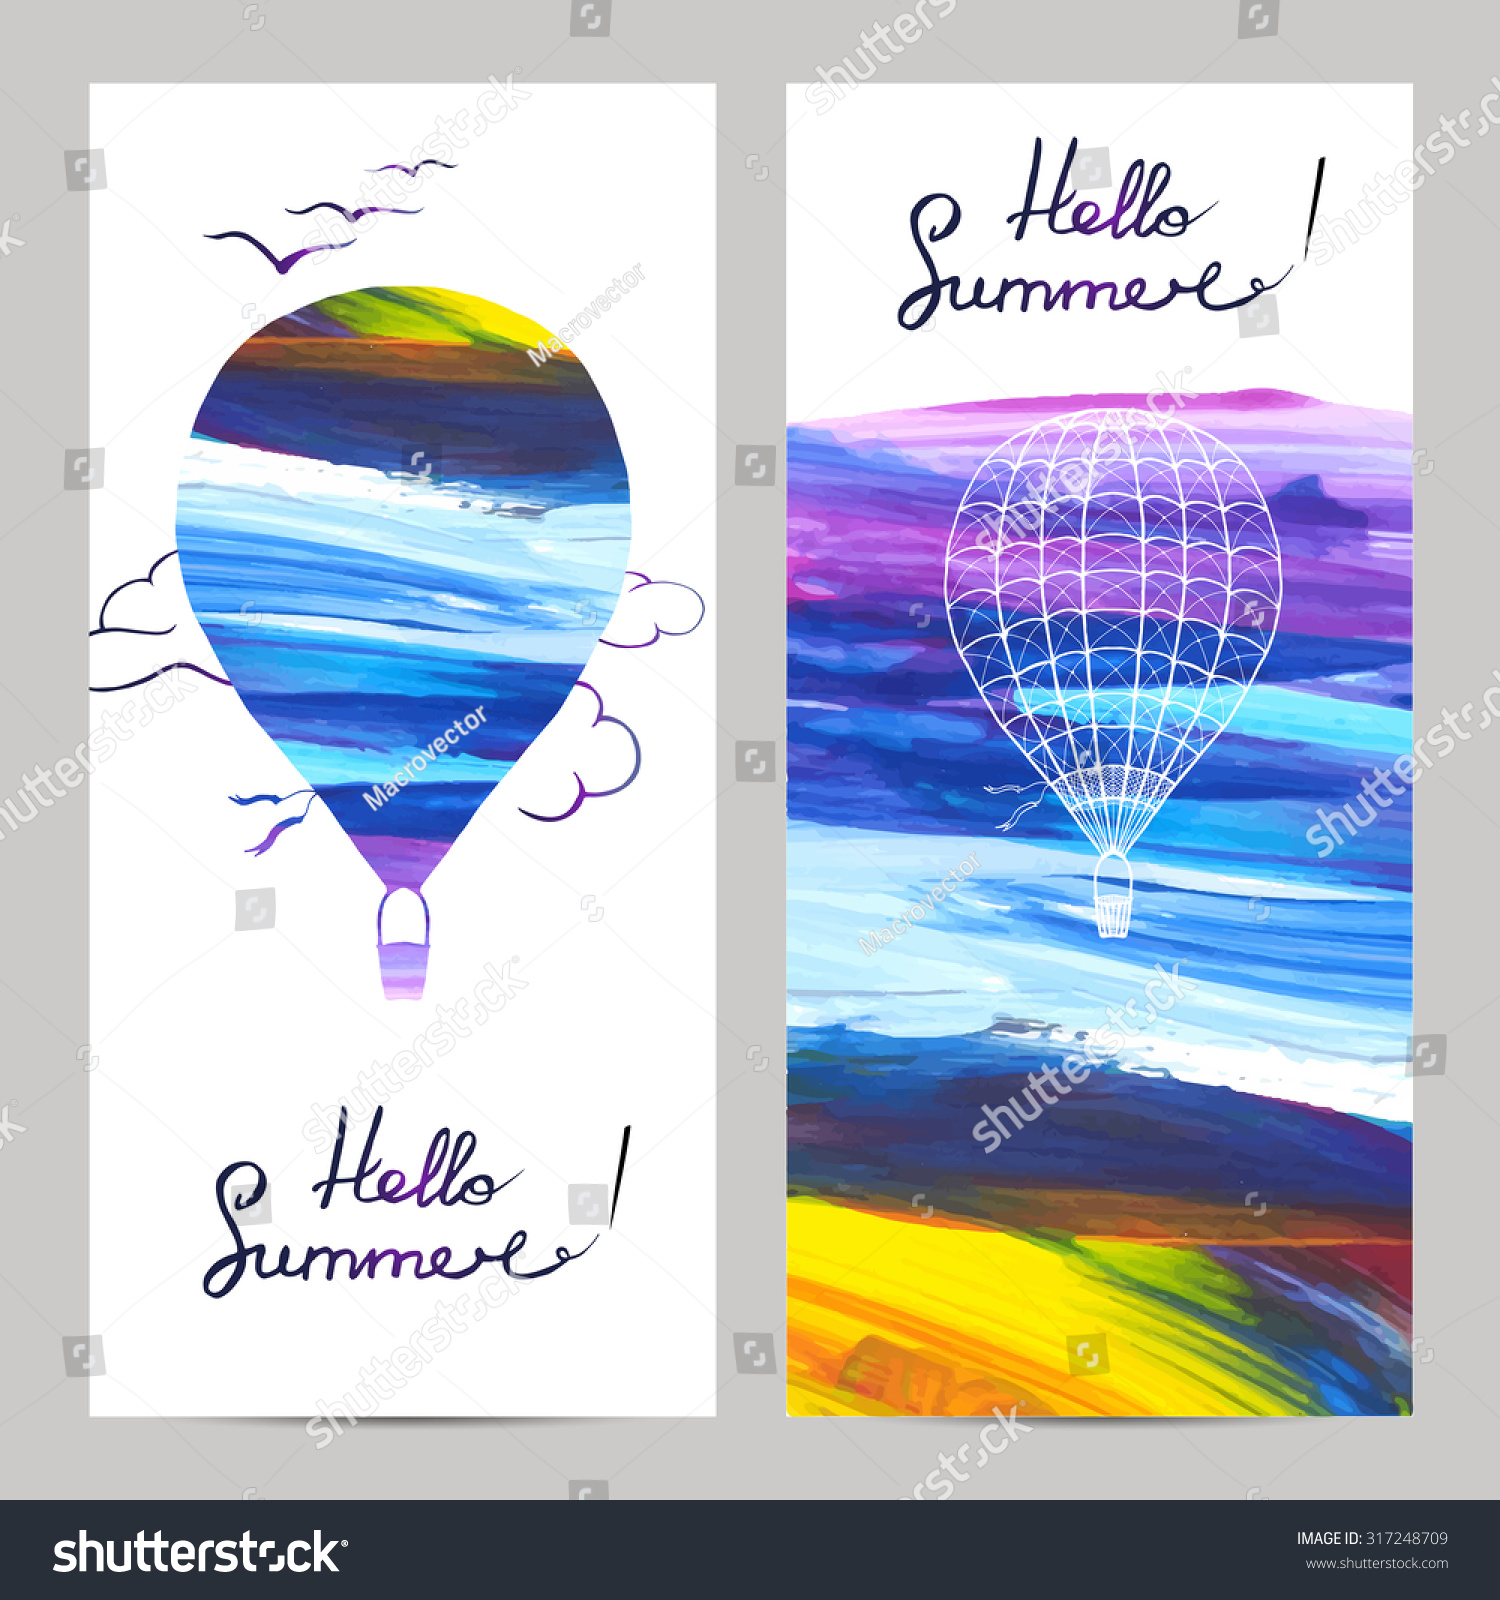 Air travel vertical banners set with hot air balloons silhouettes on painted background isolated vector illustration #317248709